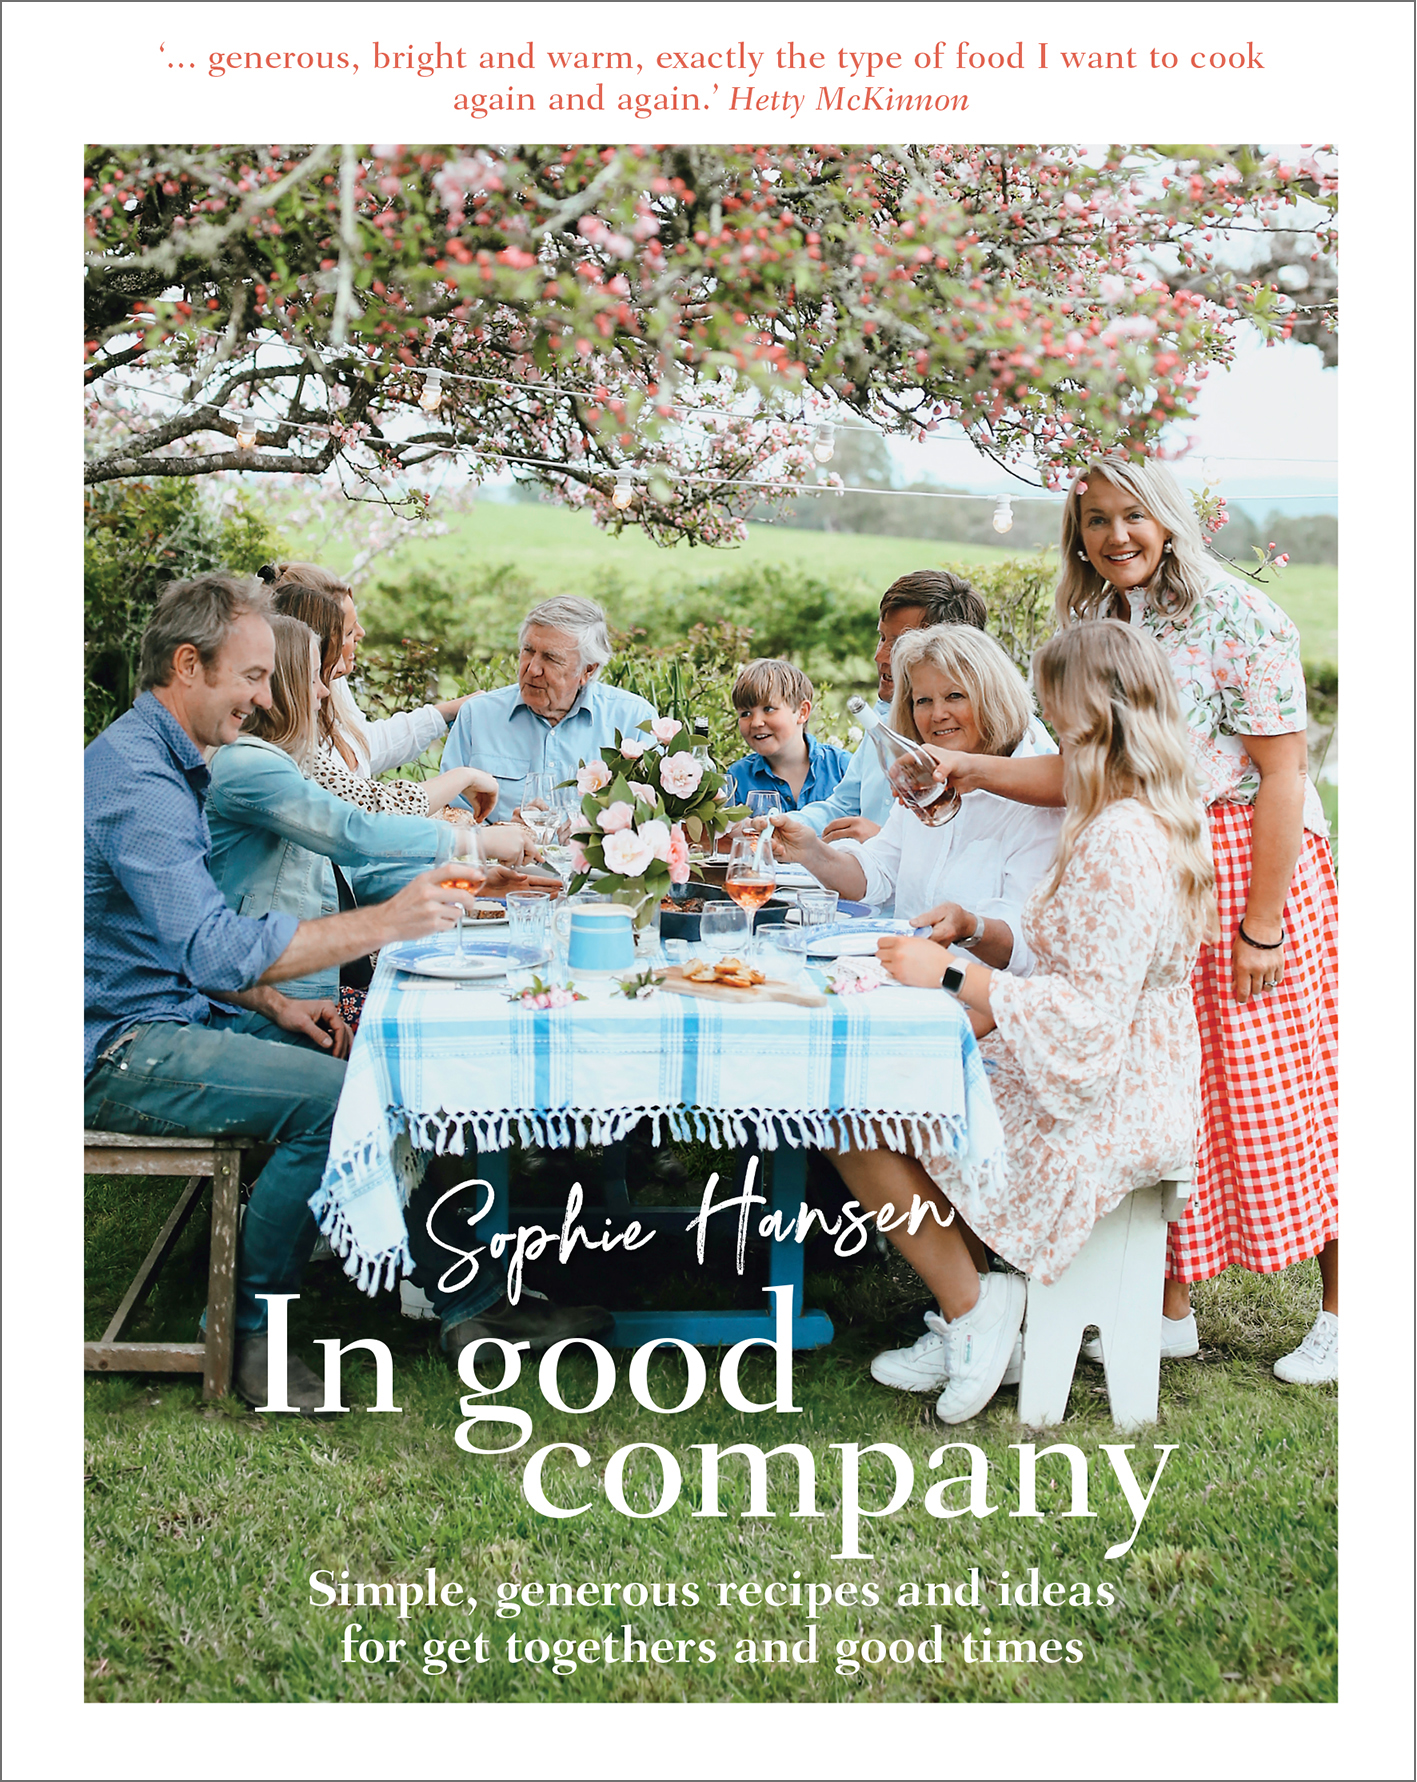 Cover of Images and text from In Good Company by Sophie Hansen; photography by Sophie Hansen. Murdoch Books RRP $39.99, image shows a group of people dining around a table outside under a tree.